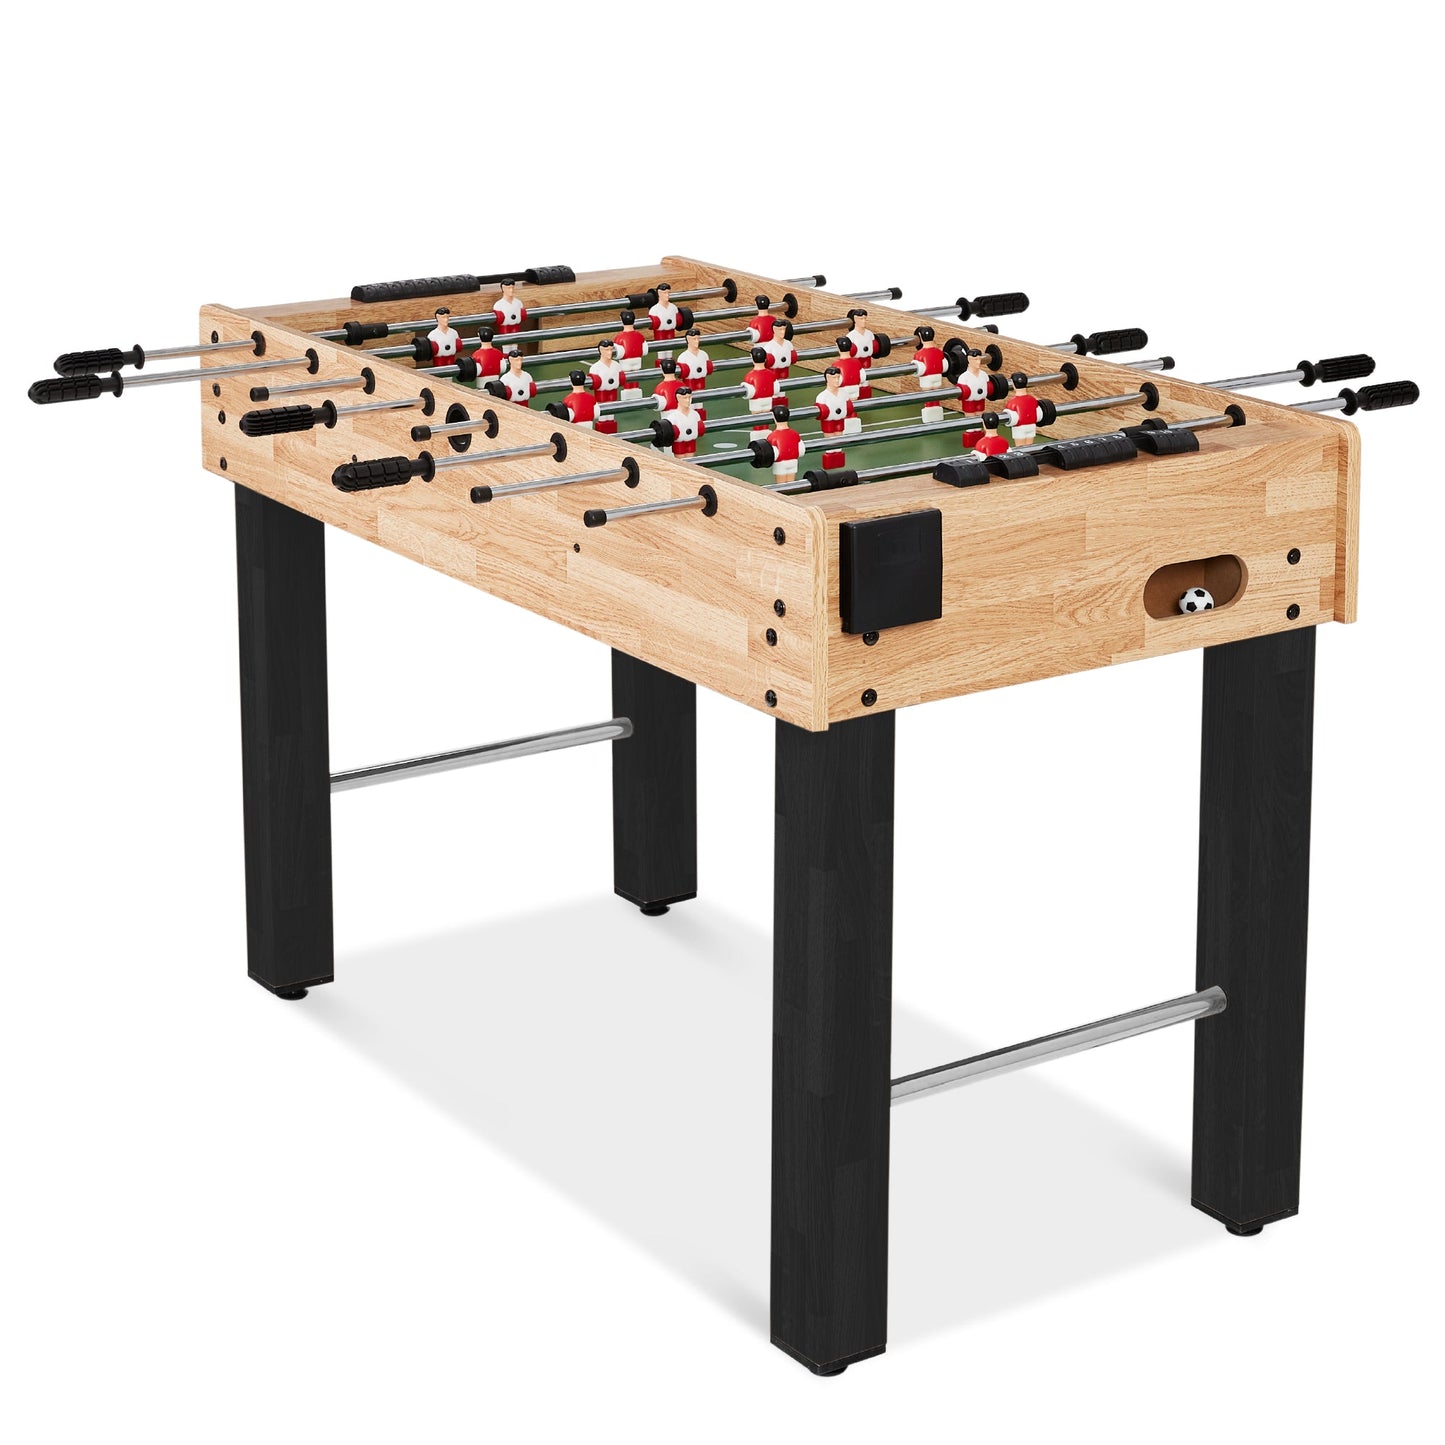 Foosball Game Table, Arcade Table Soccer w/ 2 Cup Holders, 2 Balls - 48in